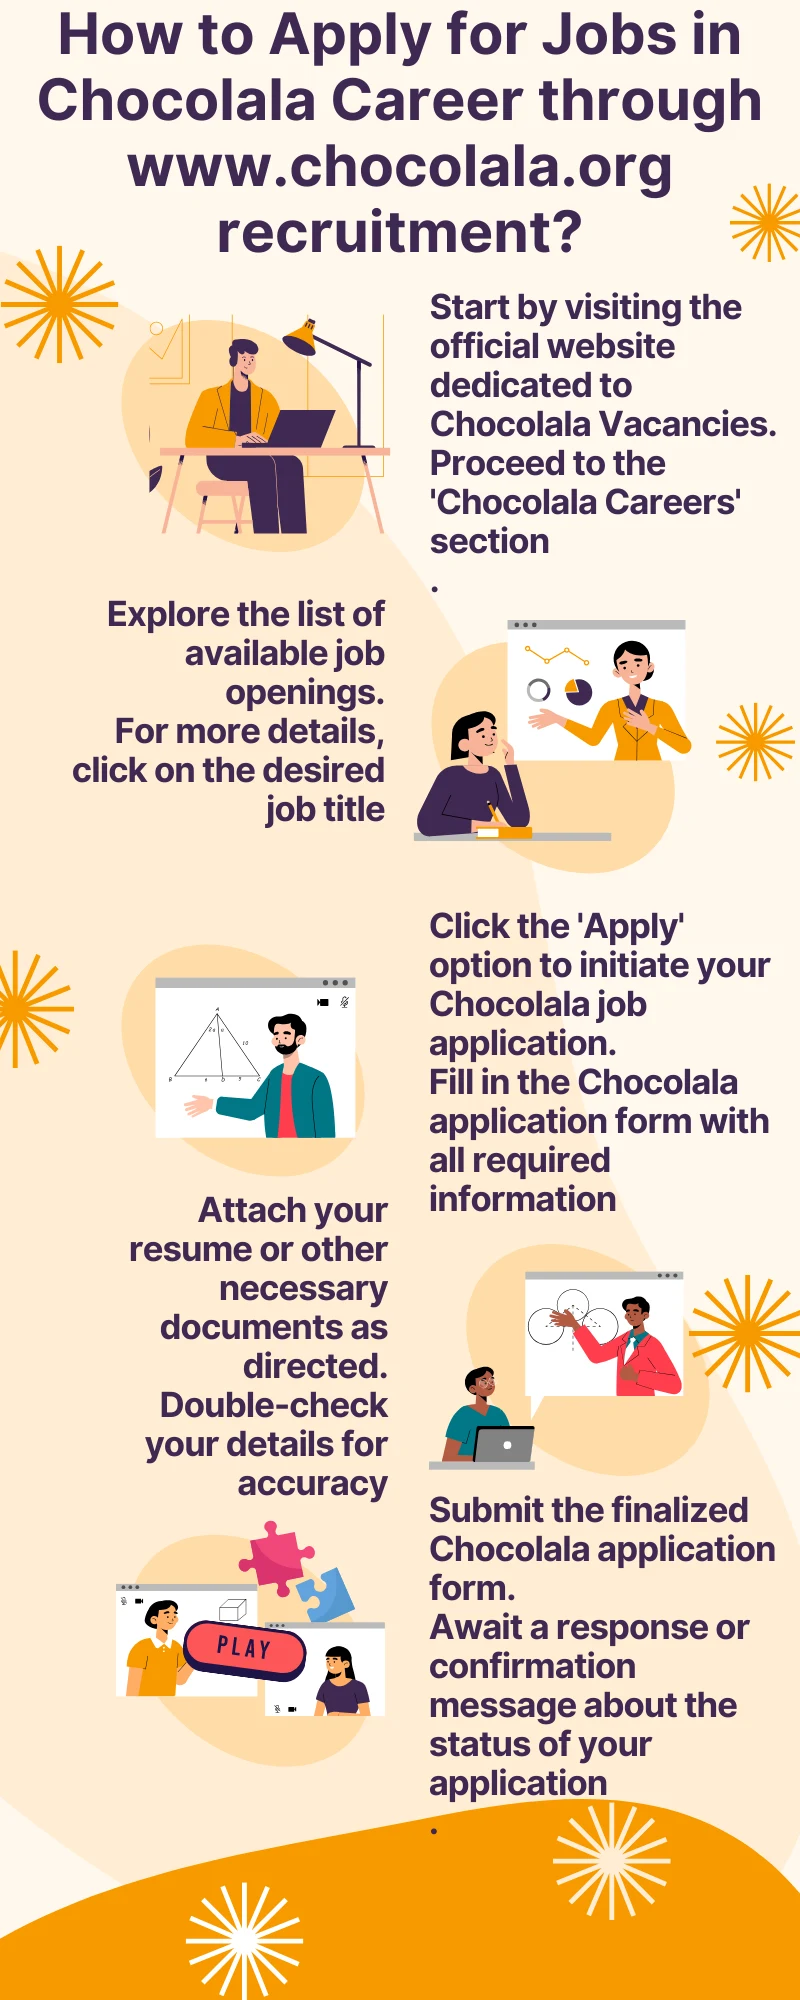 How to Apply for Jobs in Chocolala Career through www.chocolala.org recruitment?